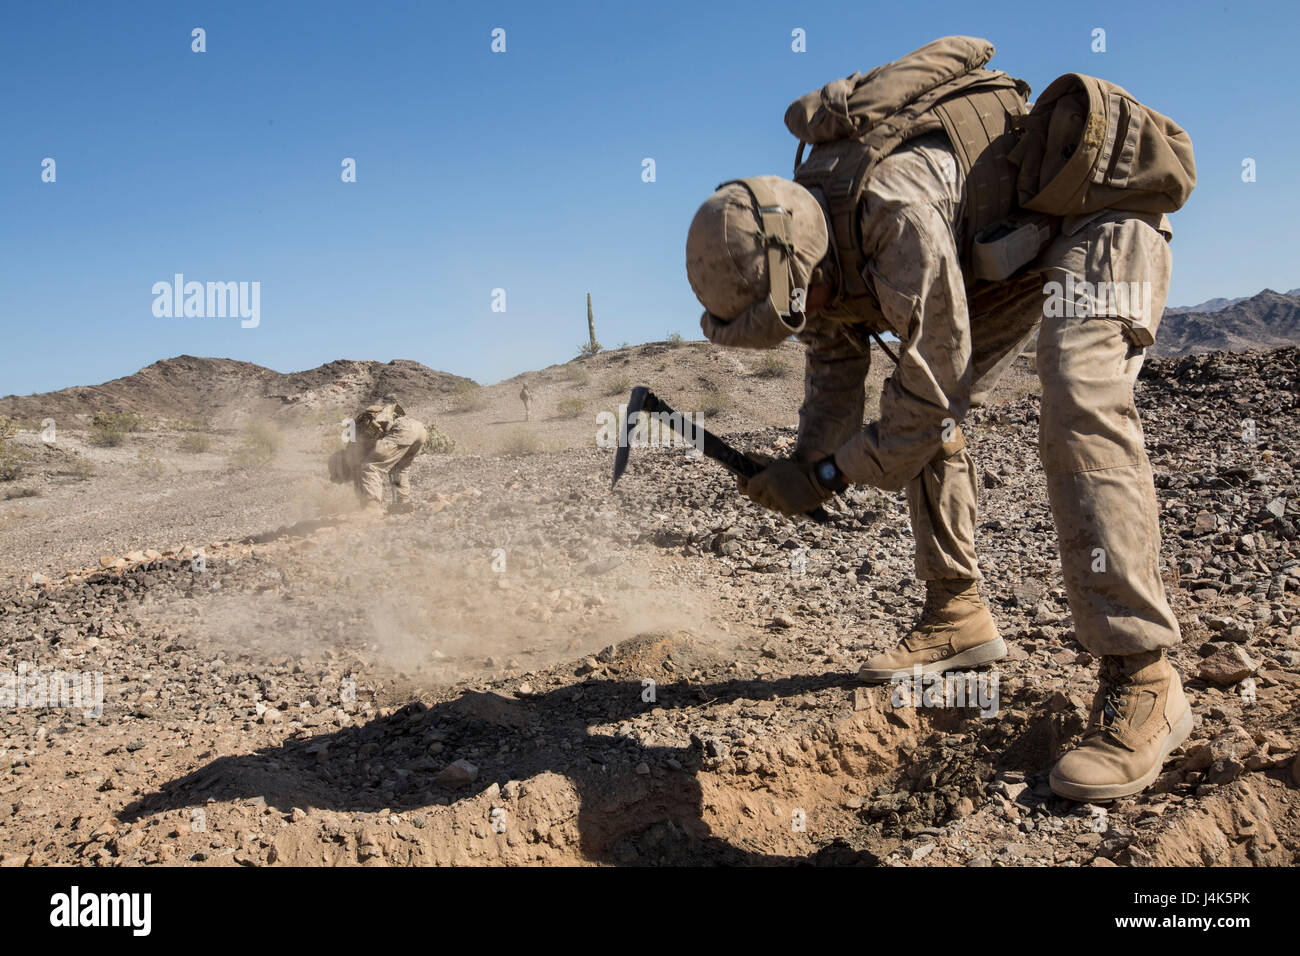 U.S. Marine Corps Lance Cpl. Zachary R. Thompson, a rifleman with Echo Company, 2nd Battalion, 6th Marine Regiment, 2nd Marine Division (2d MARDIV), digs his skirmisher fighting position during a battalion-level defensive position for Talon Exercise (TalonEx) 2-17, Yuma, A.Z., April 18, 2017. The purpose of TalonEx was for ground combat units to conduct integrated training in support of the Weapons and Tactics Instructor Course (WTI) 2-17 hosted by Marine Aviation Weapons and Tactics Squadron One (MAWTS-1). Stock Photo